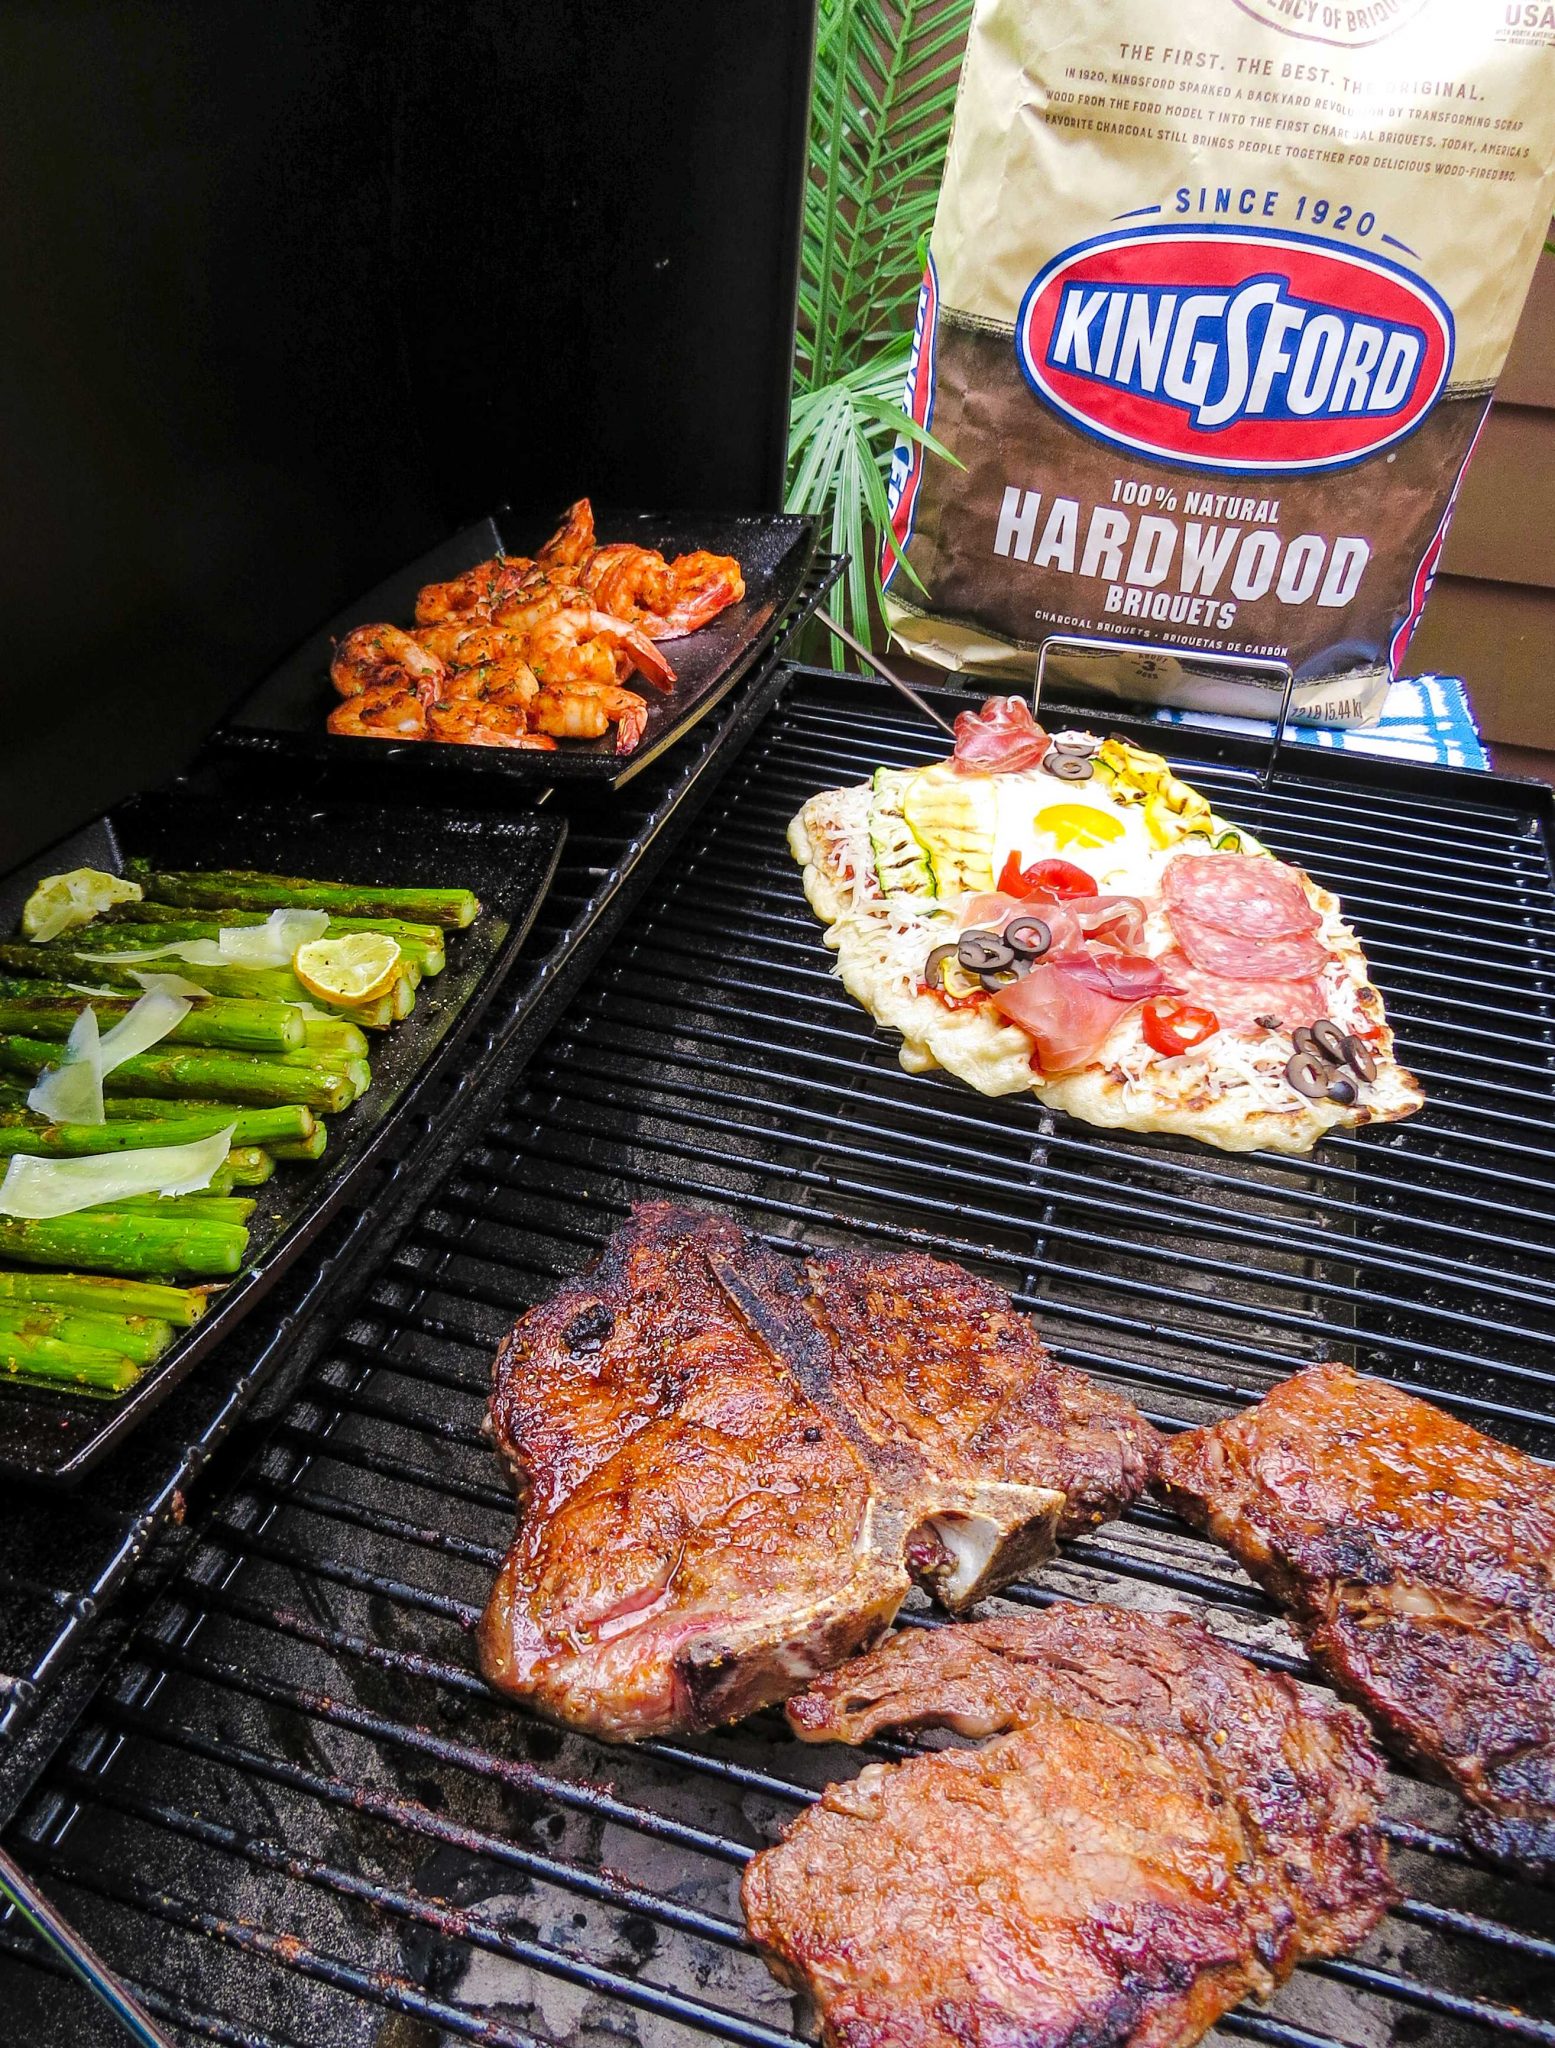 home depot kingsford hardwood charcoal best grilled pizza at home Sweet Savant America's best food blogger